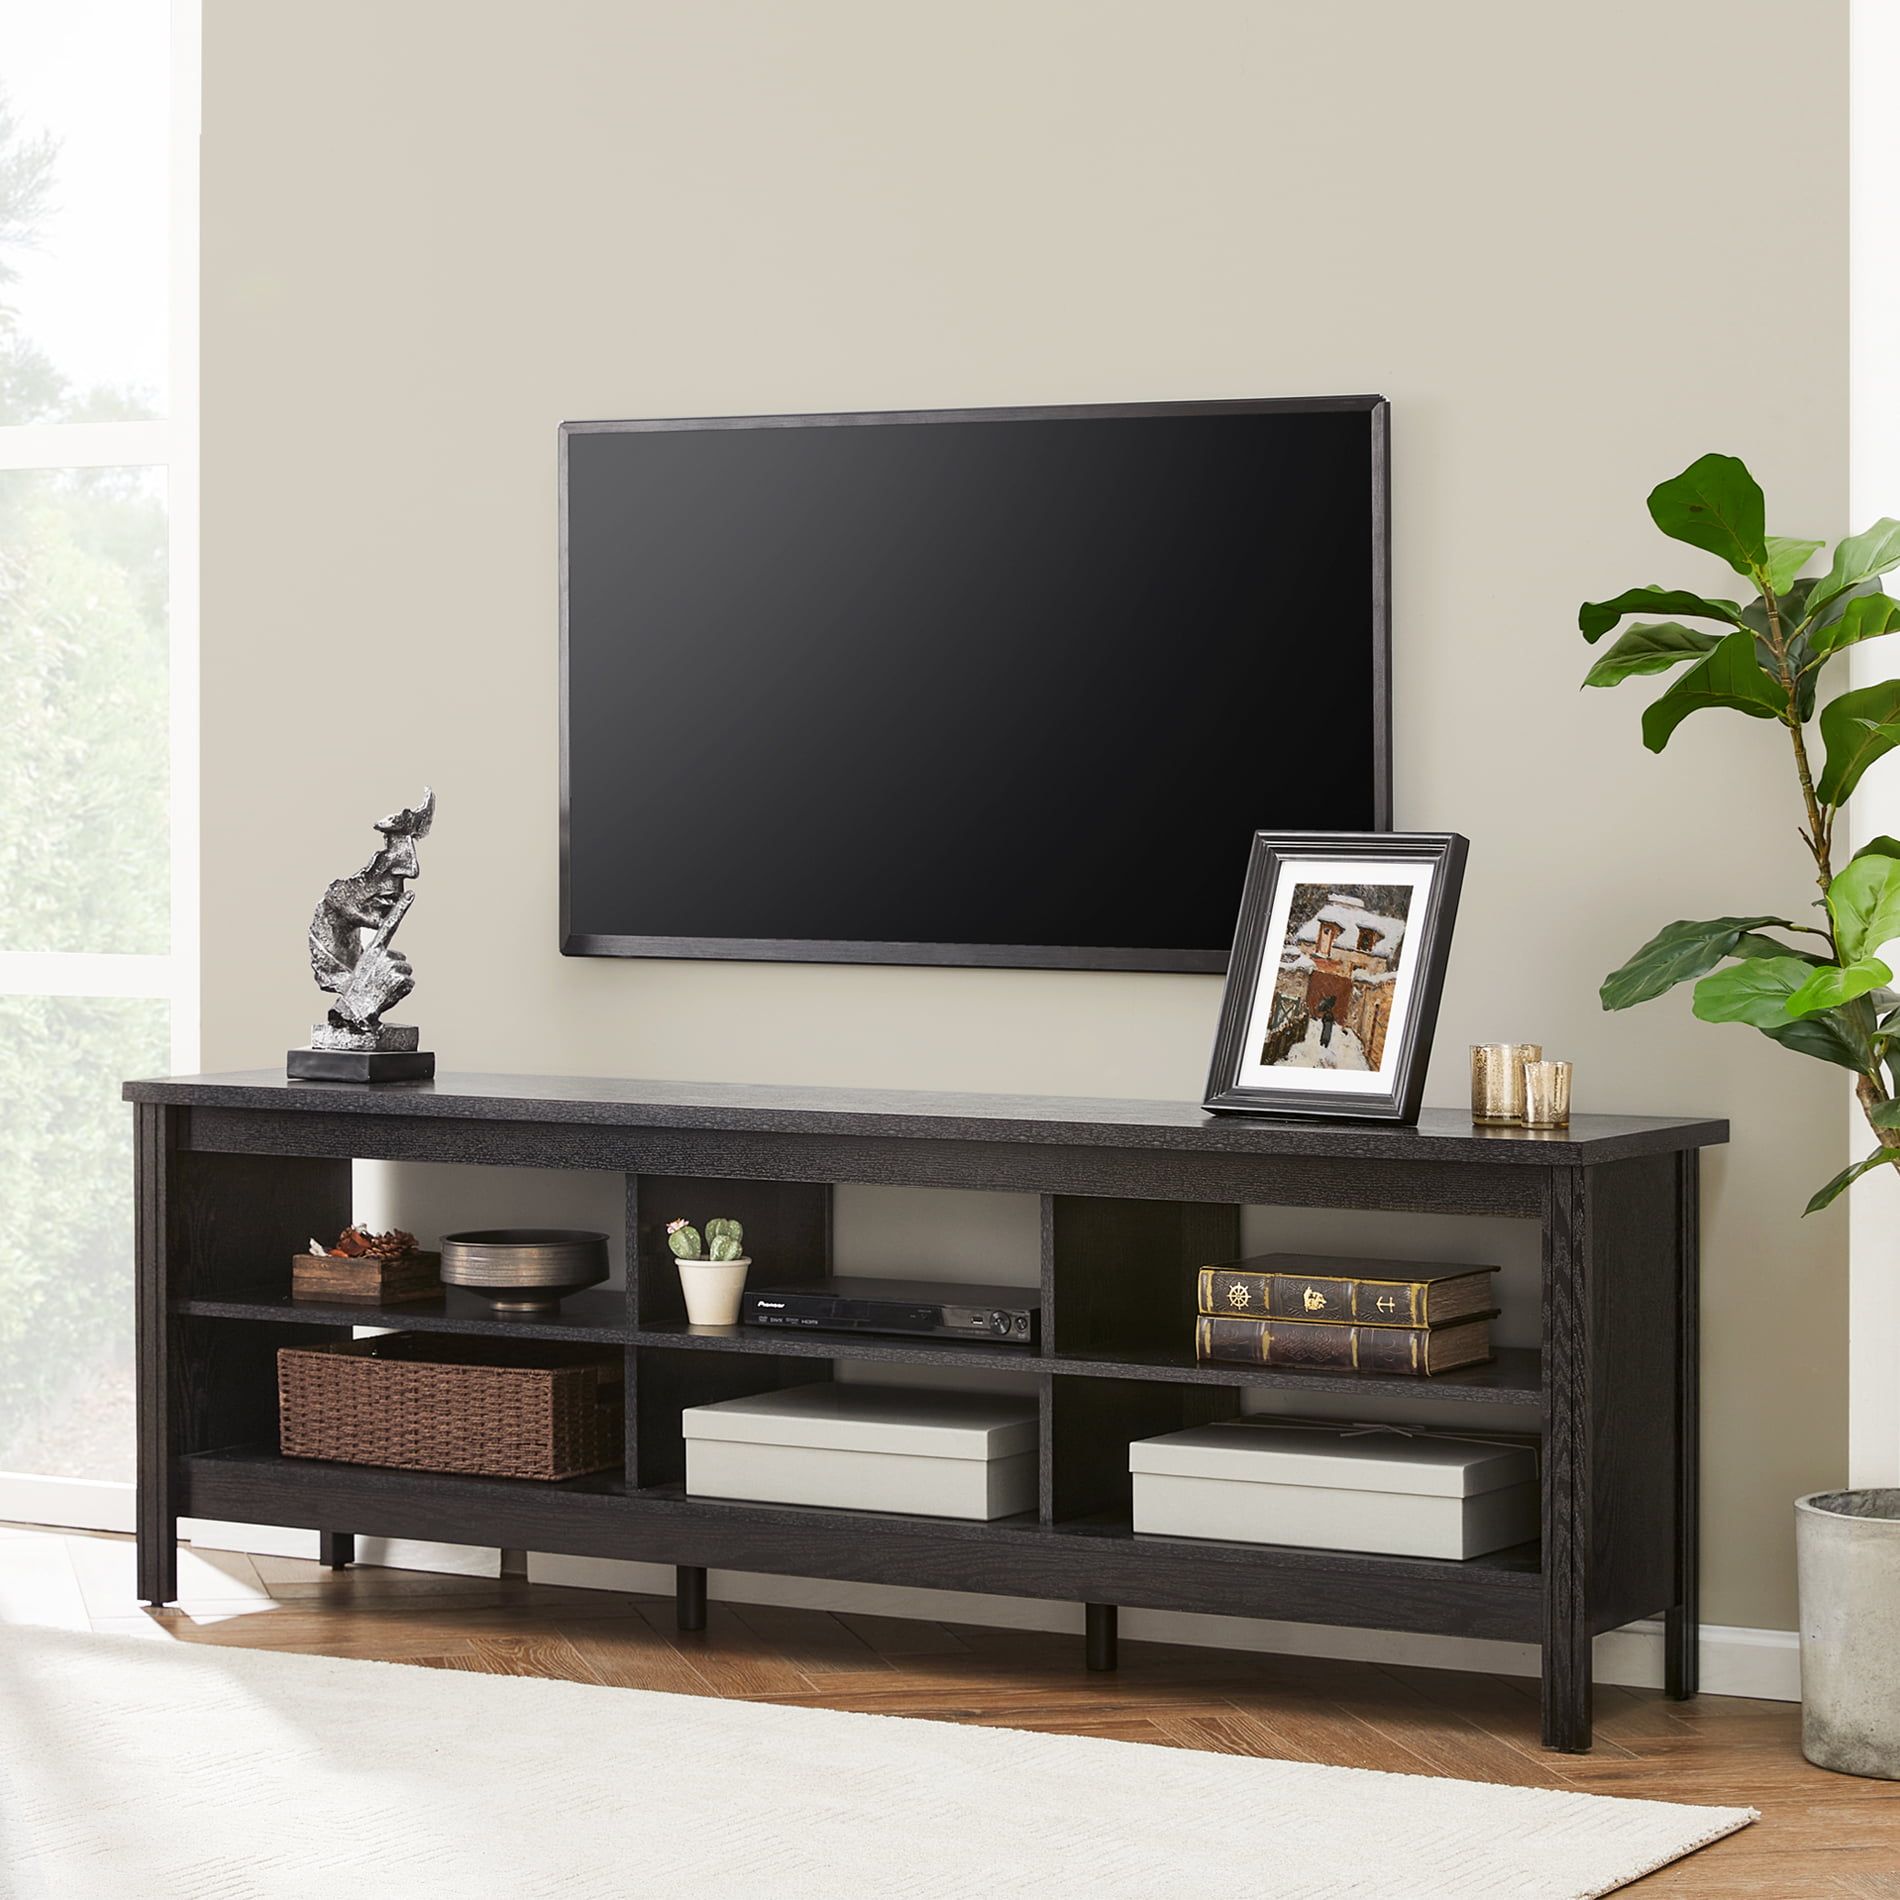 Farmhouse Tv Stands For 75 Inch Flat Screen Media Console Storage With Regard To Stand For Flat Screen (View 10 of 20)